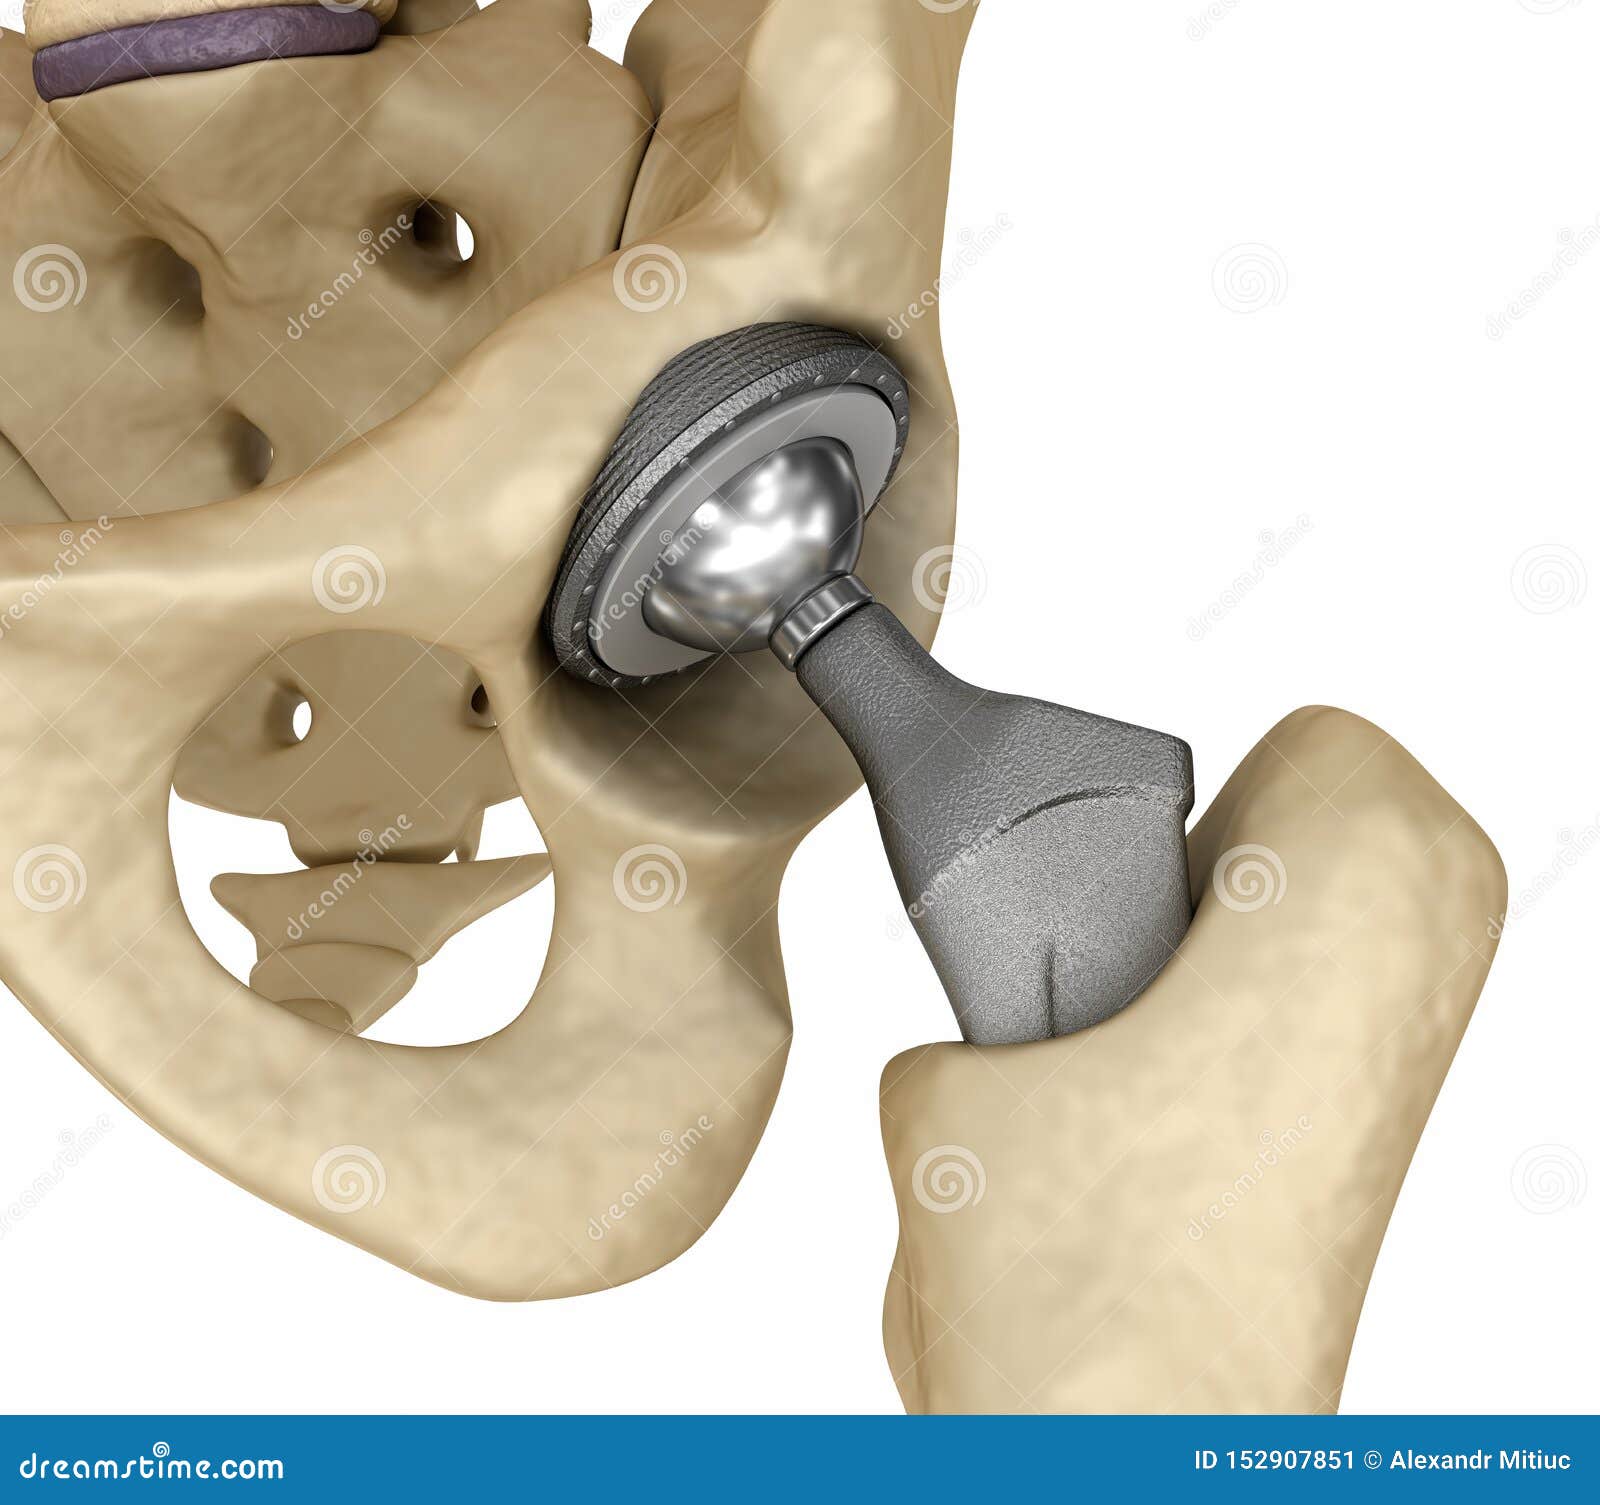 hip replacement implant installed in the pelvis bone